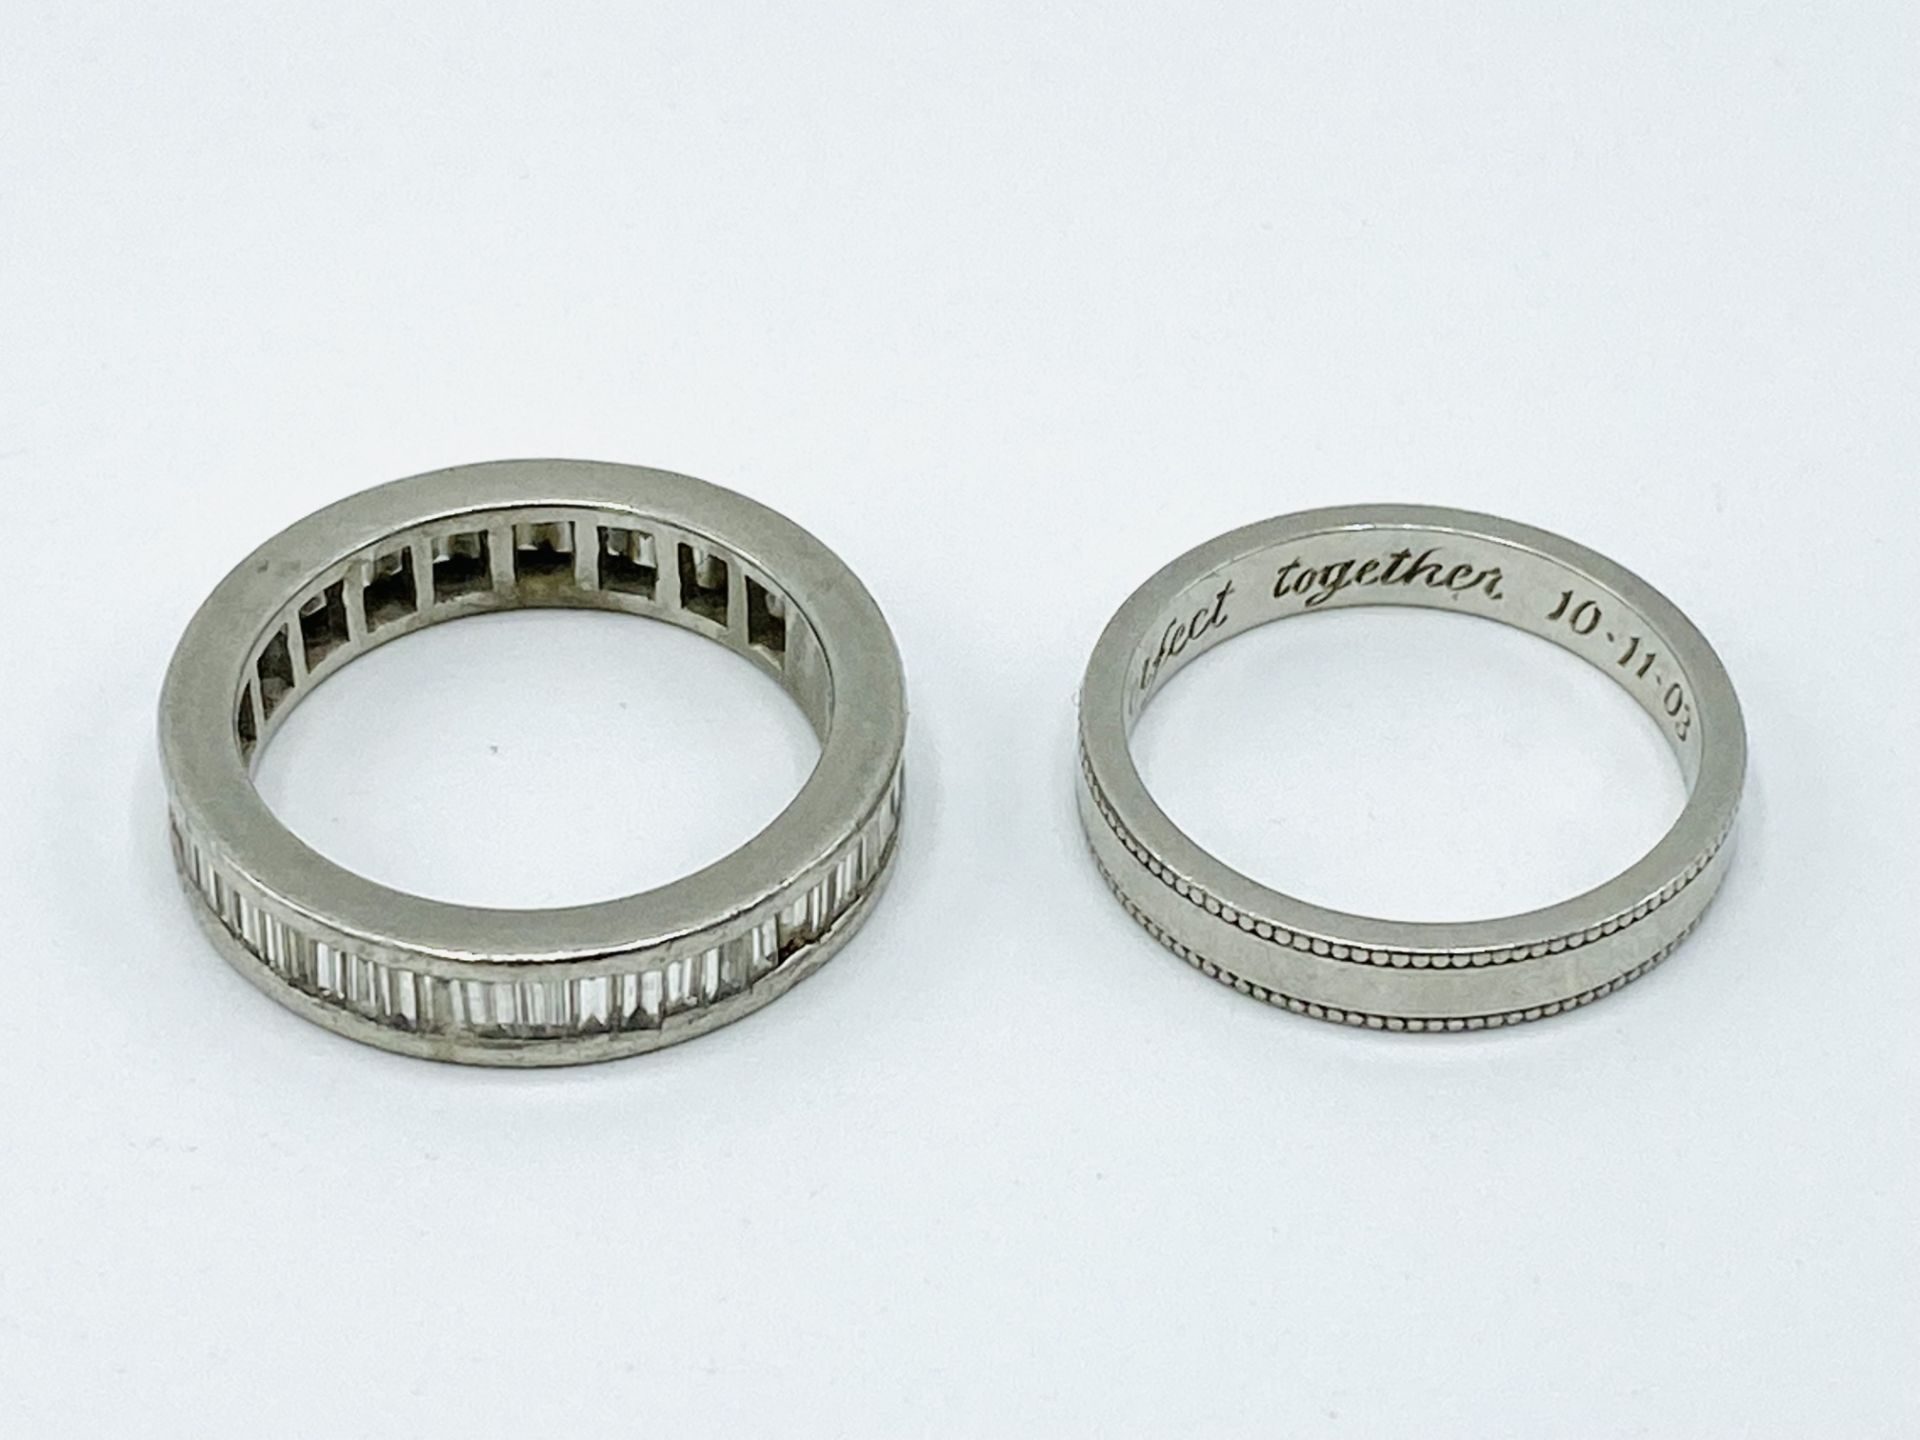 Platinum and diamond eternity ring together with a platinum band - Image 2 of 3